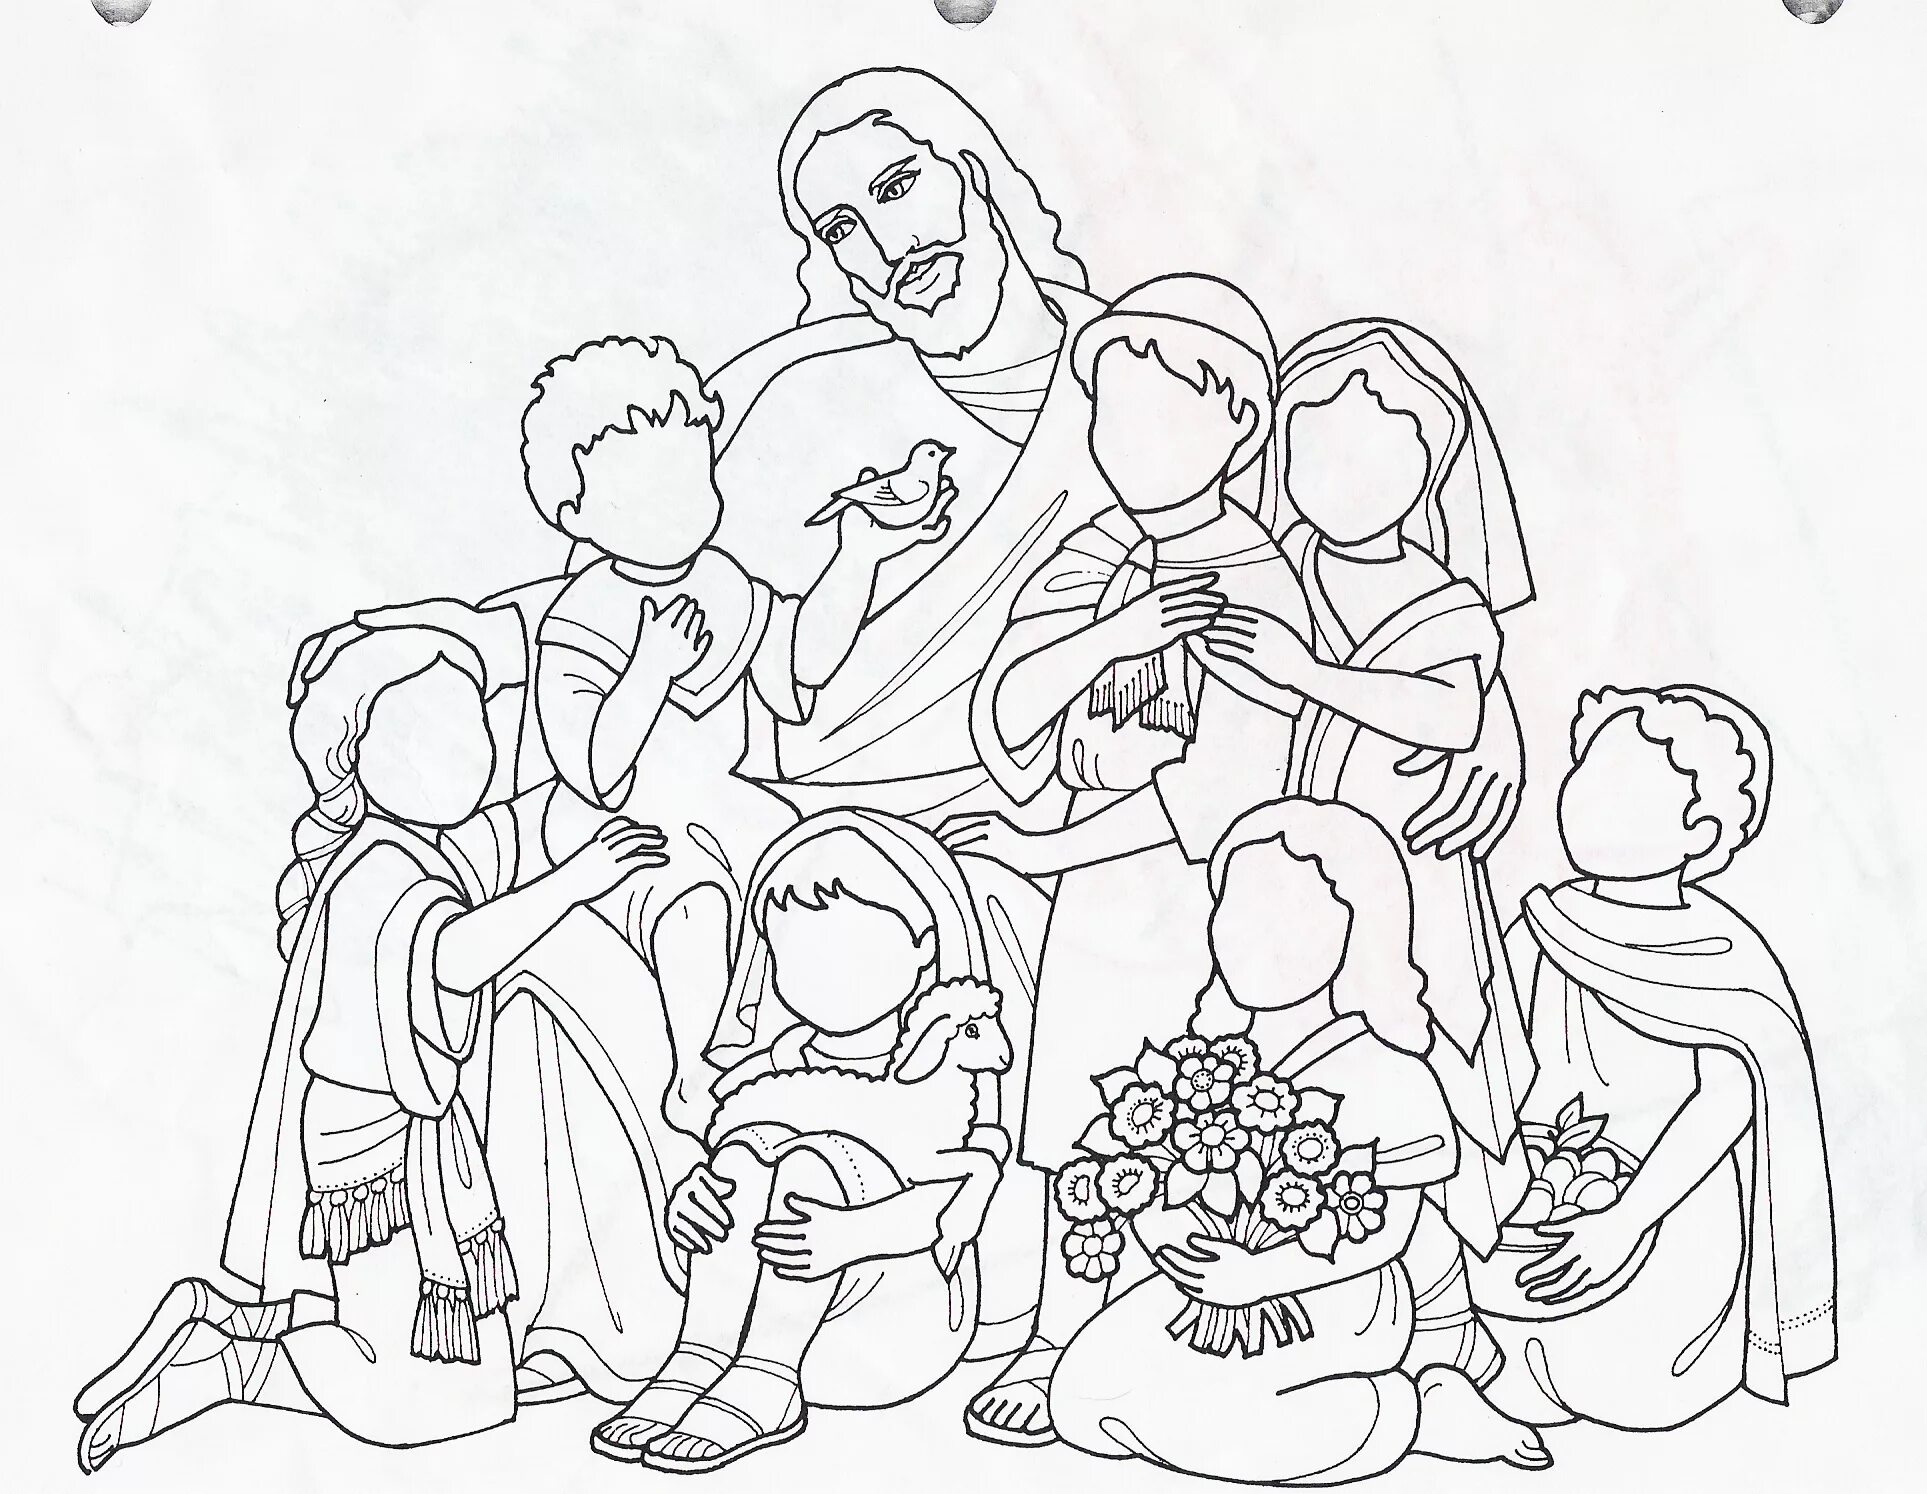 Christian cheering coloring book for kids